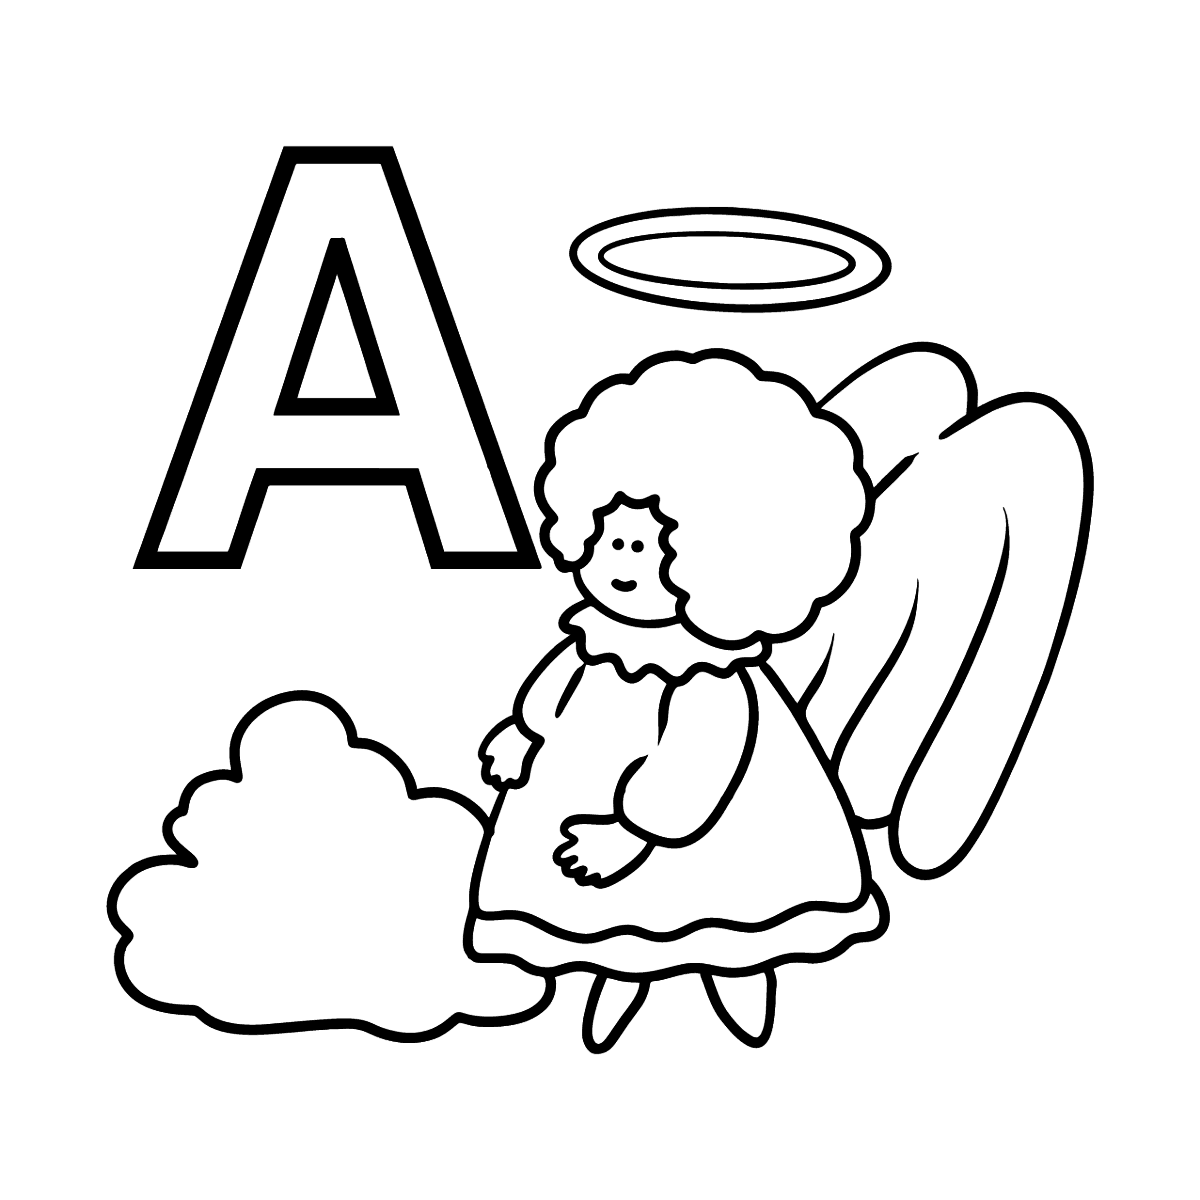 letters-and-spanish-alphabet-coloring-pages-online-free